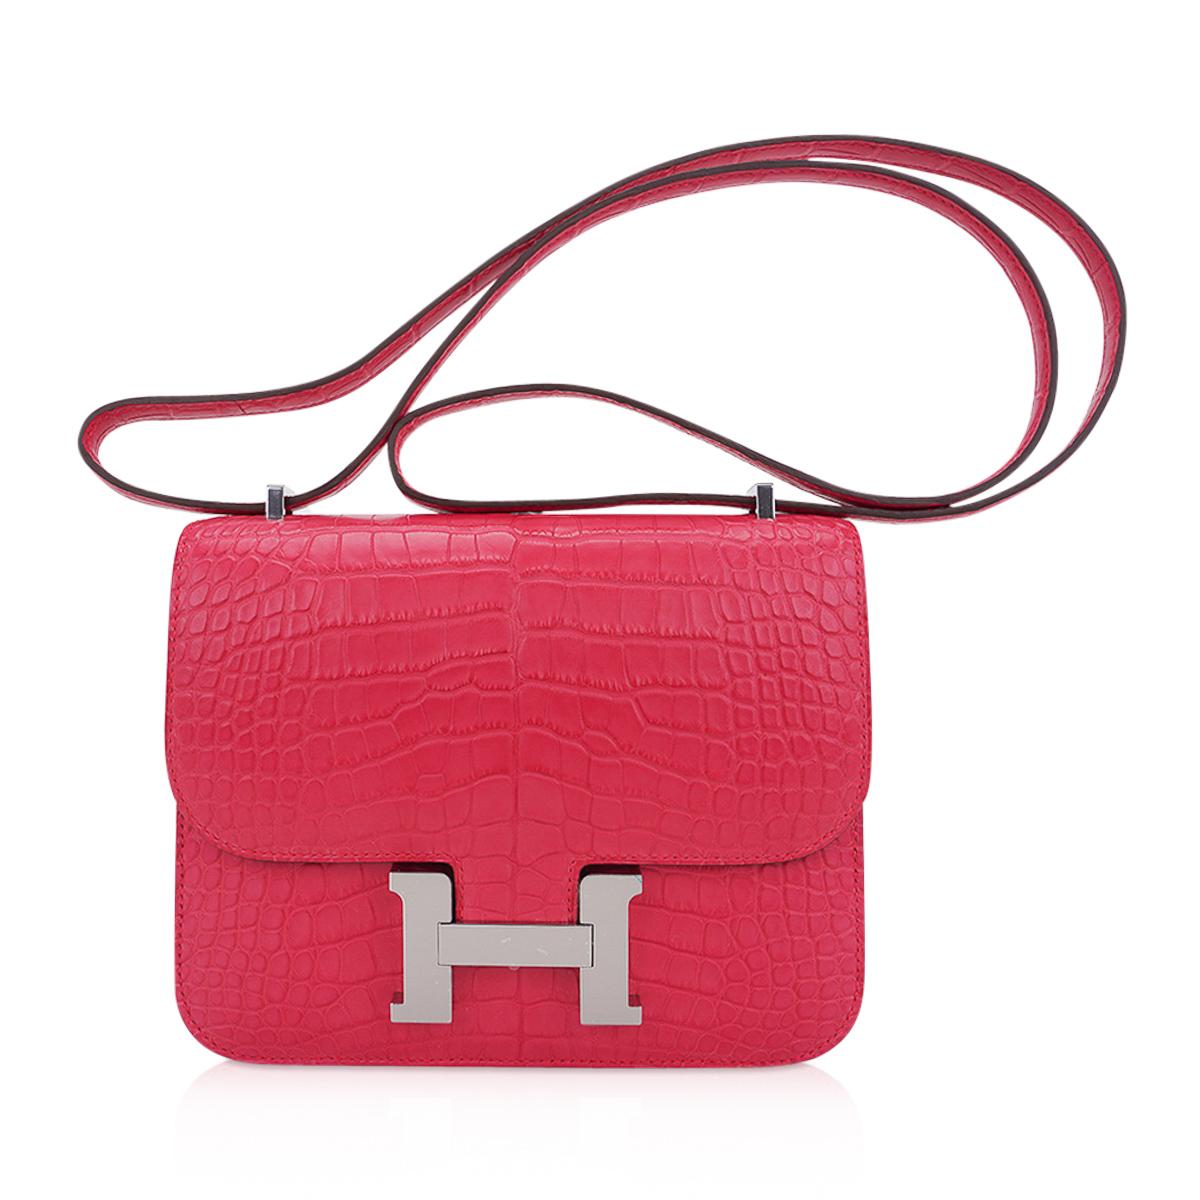 Hermes Constance Bag 18 Rose Extreme Matte Alligator Palladium Hardware In New Condition For Sale In Miami, FL